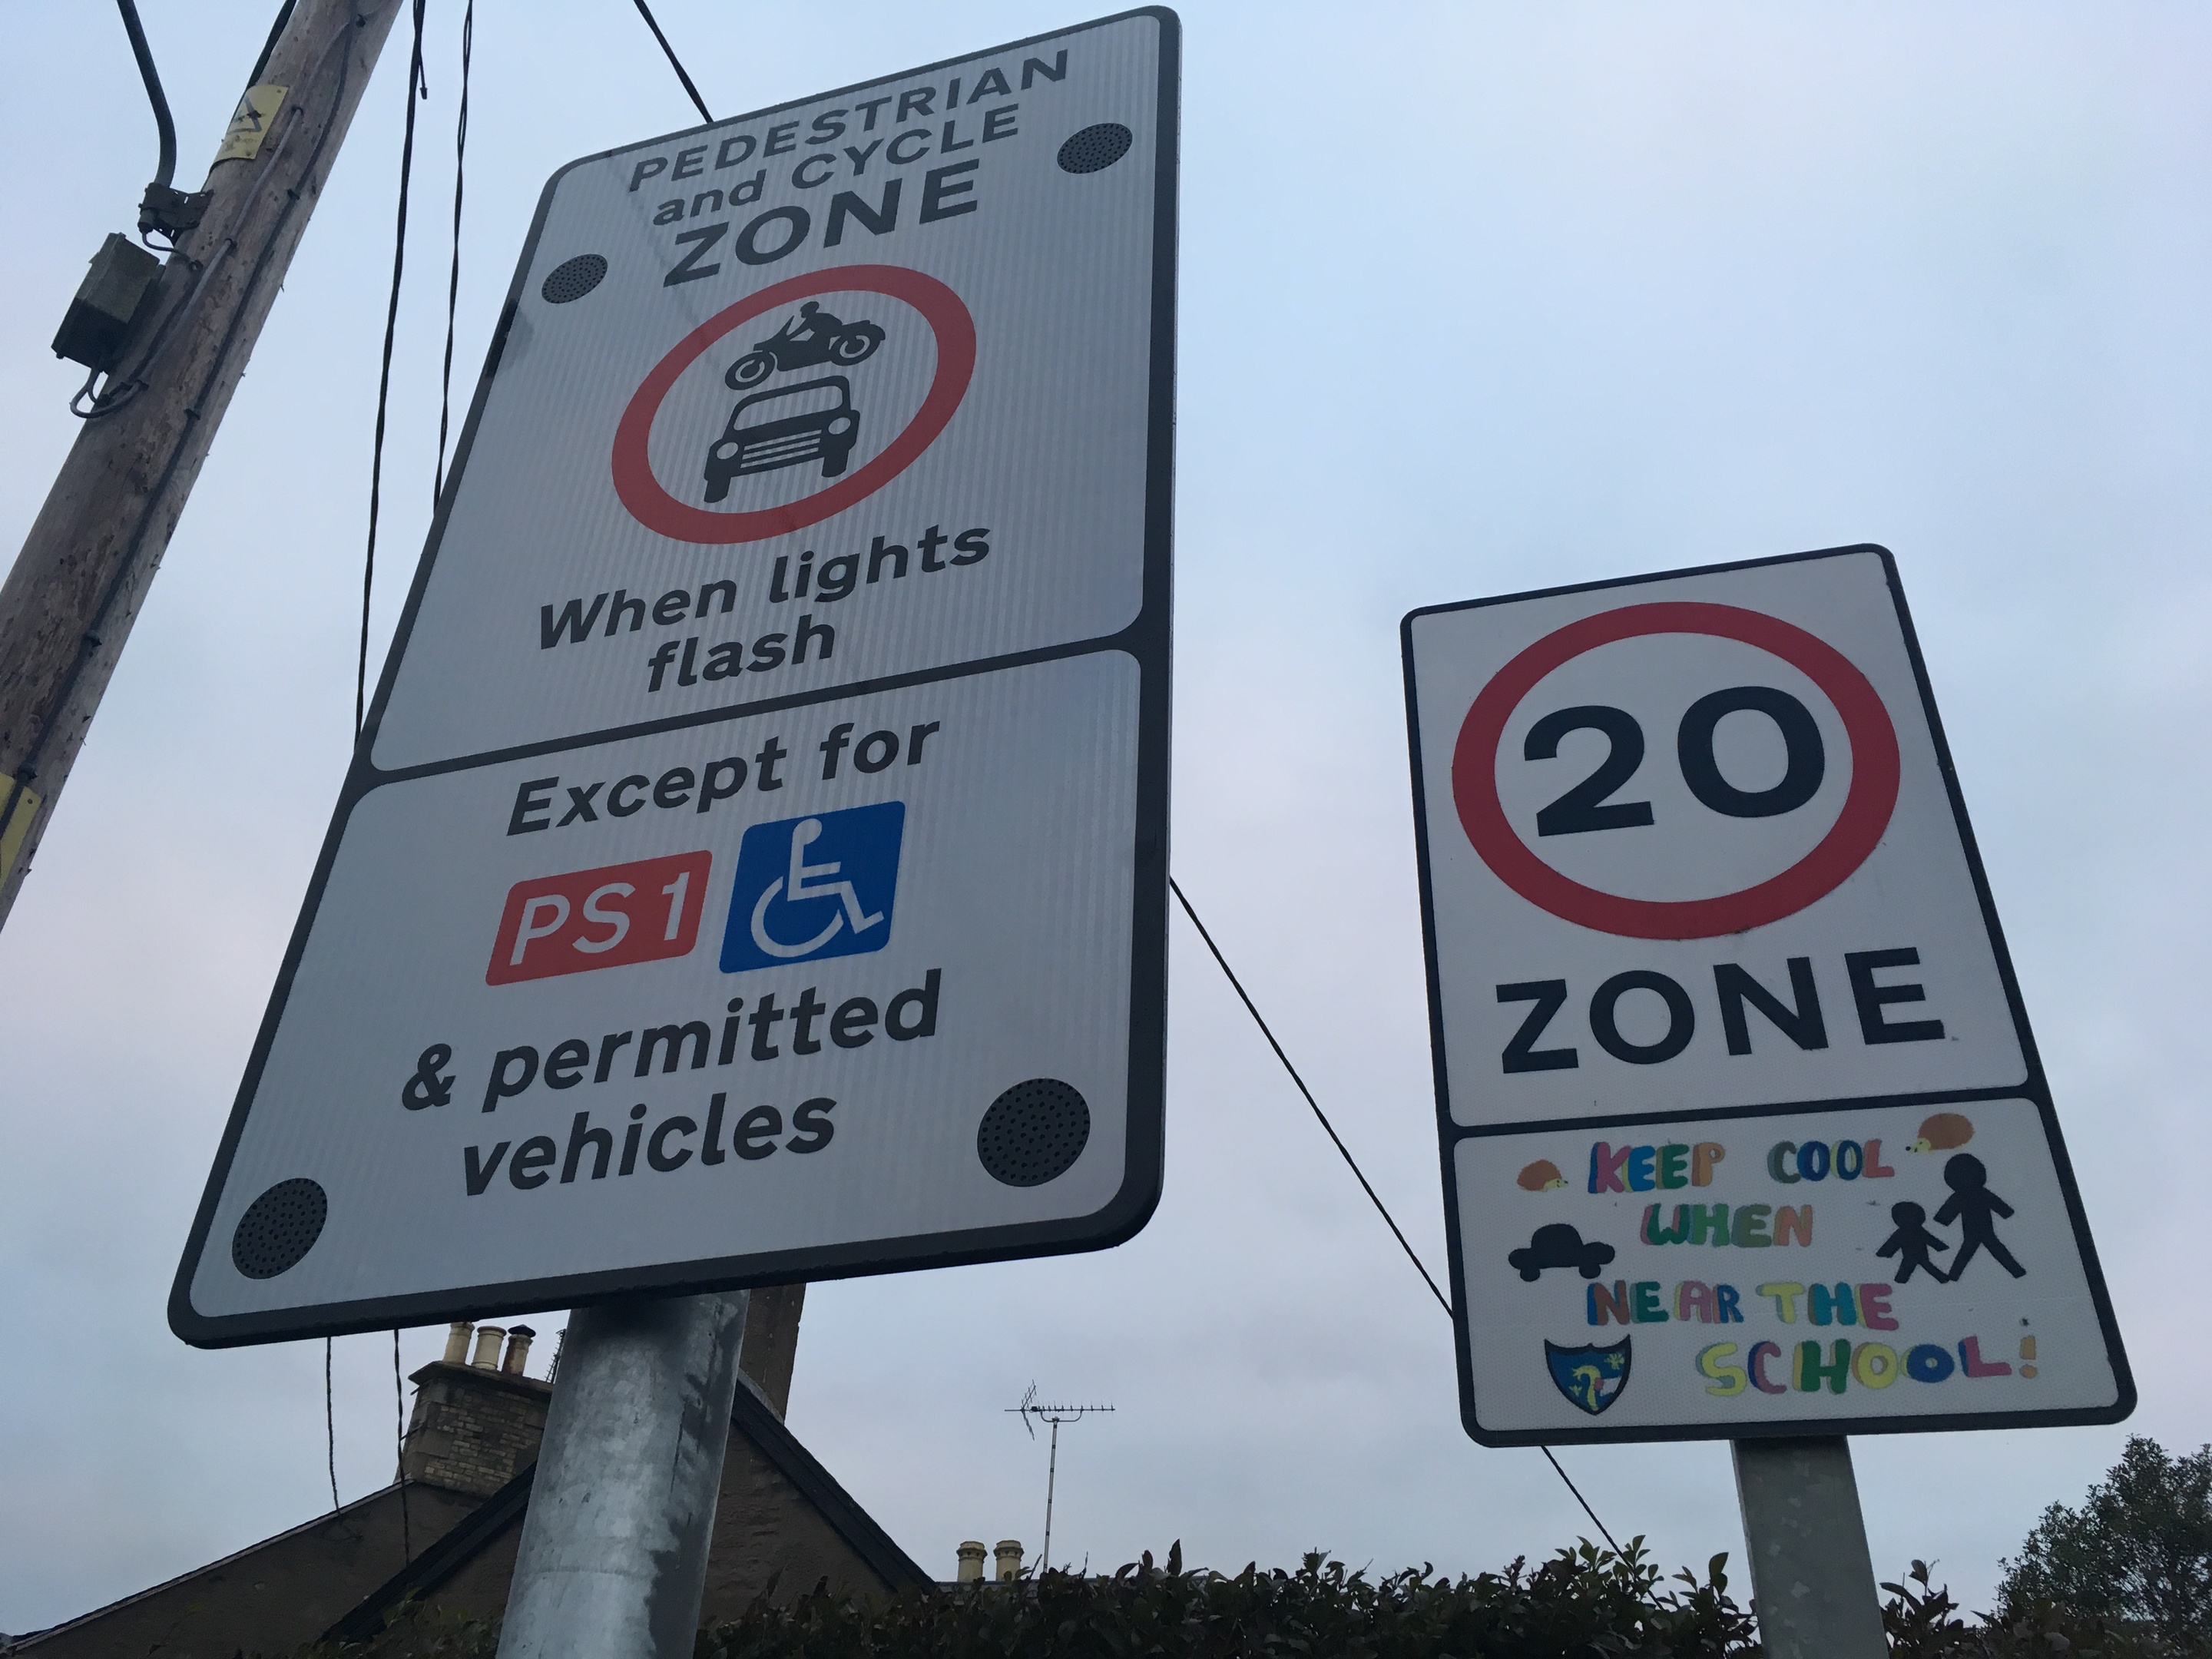 School exclusion zone warning signs.